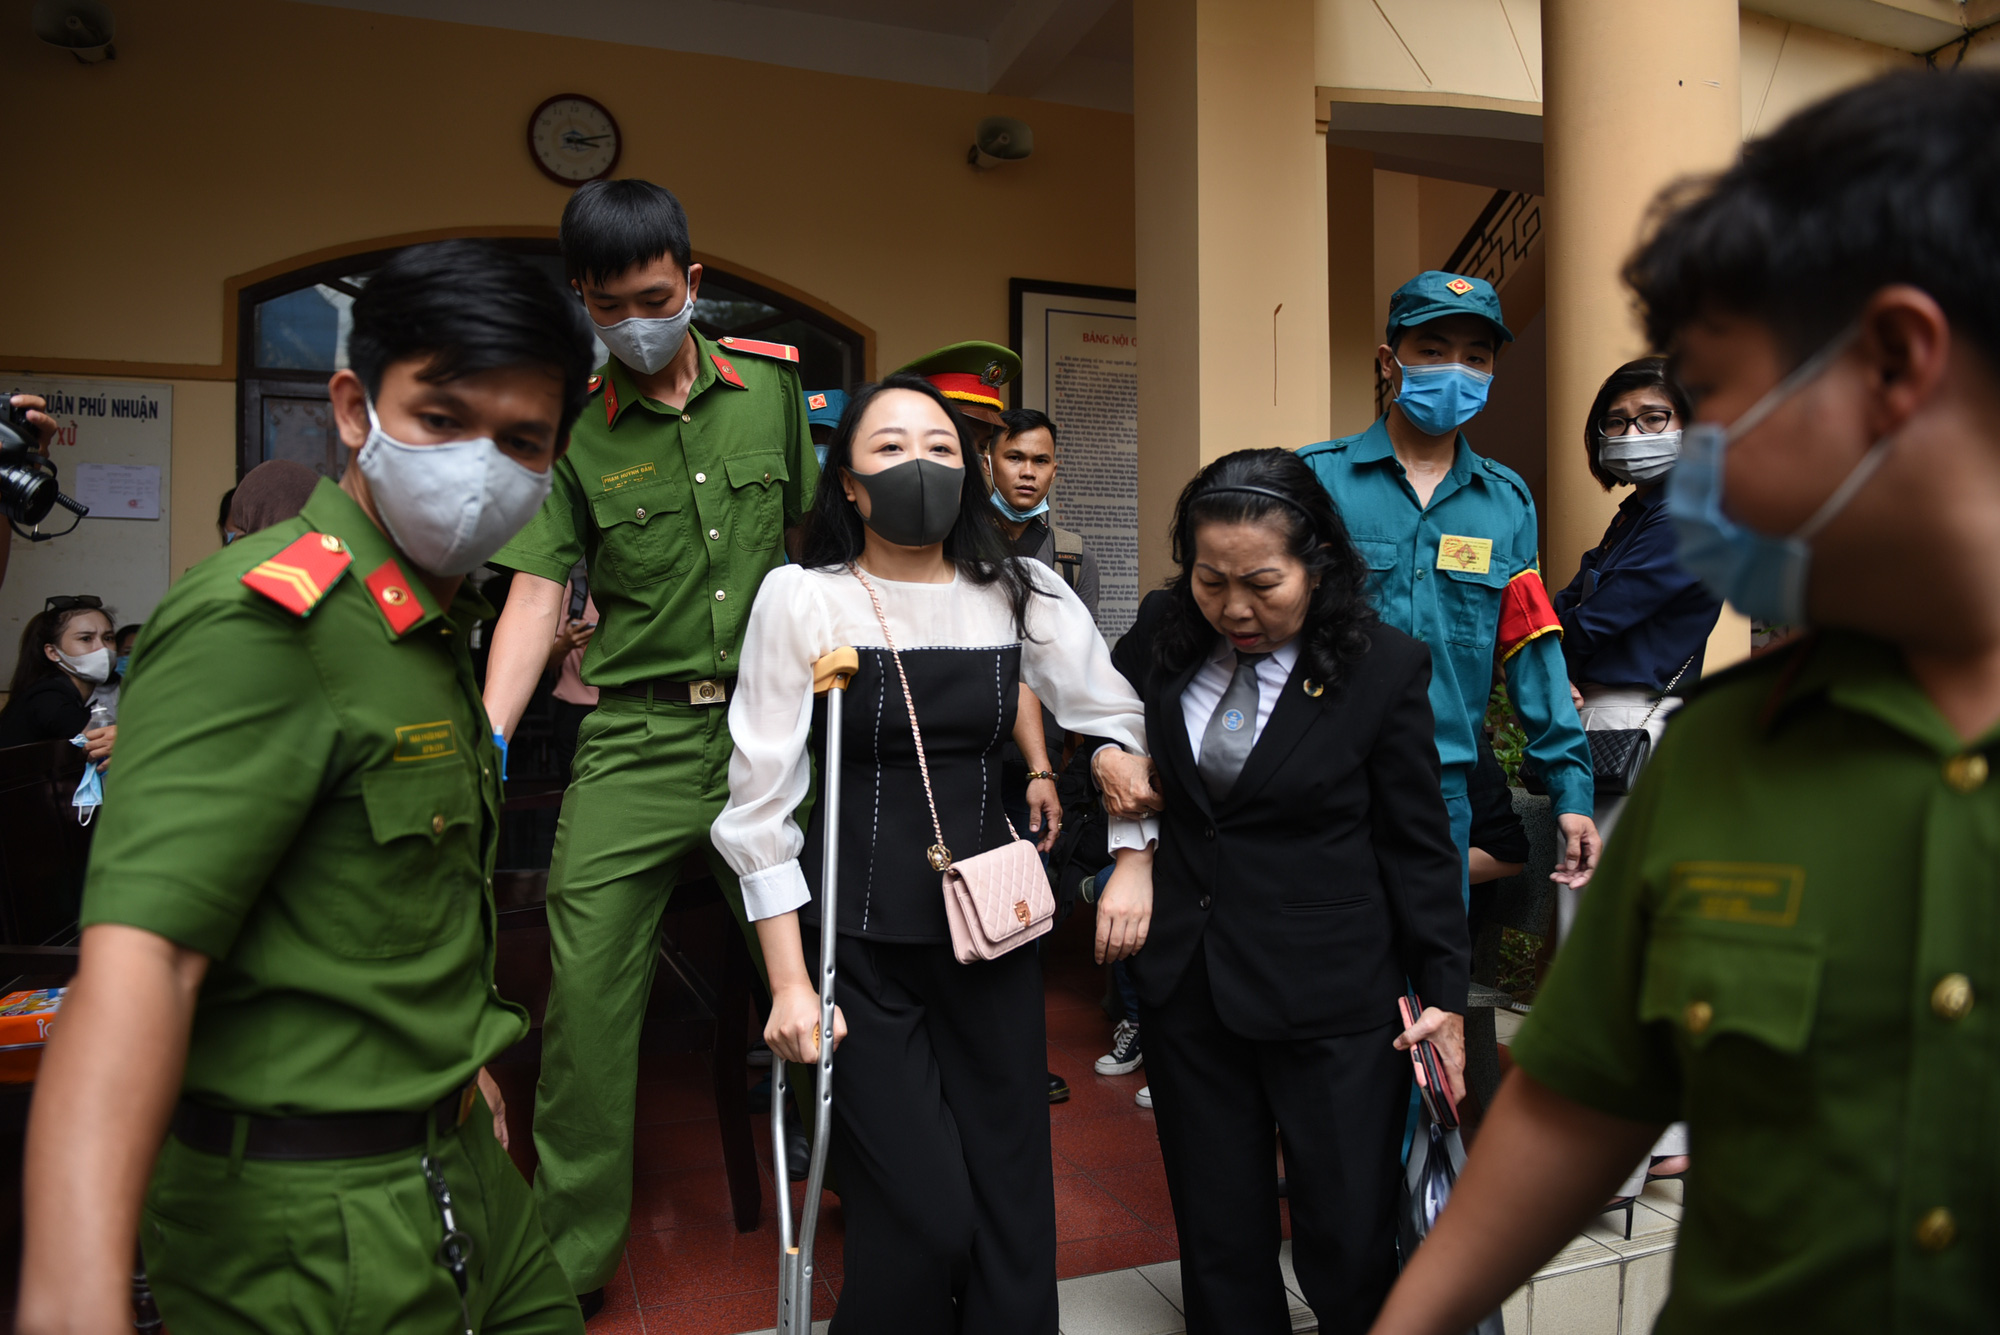 Nguyen Thi Bich Huong leaves the People’s Court in Phu Nhuan District, Ho Chi Minh City, December 16, 2020. Photo: Ngoc Phuong / Tuoi Tre